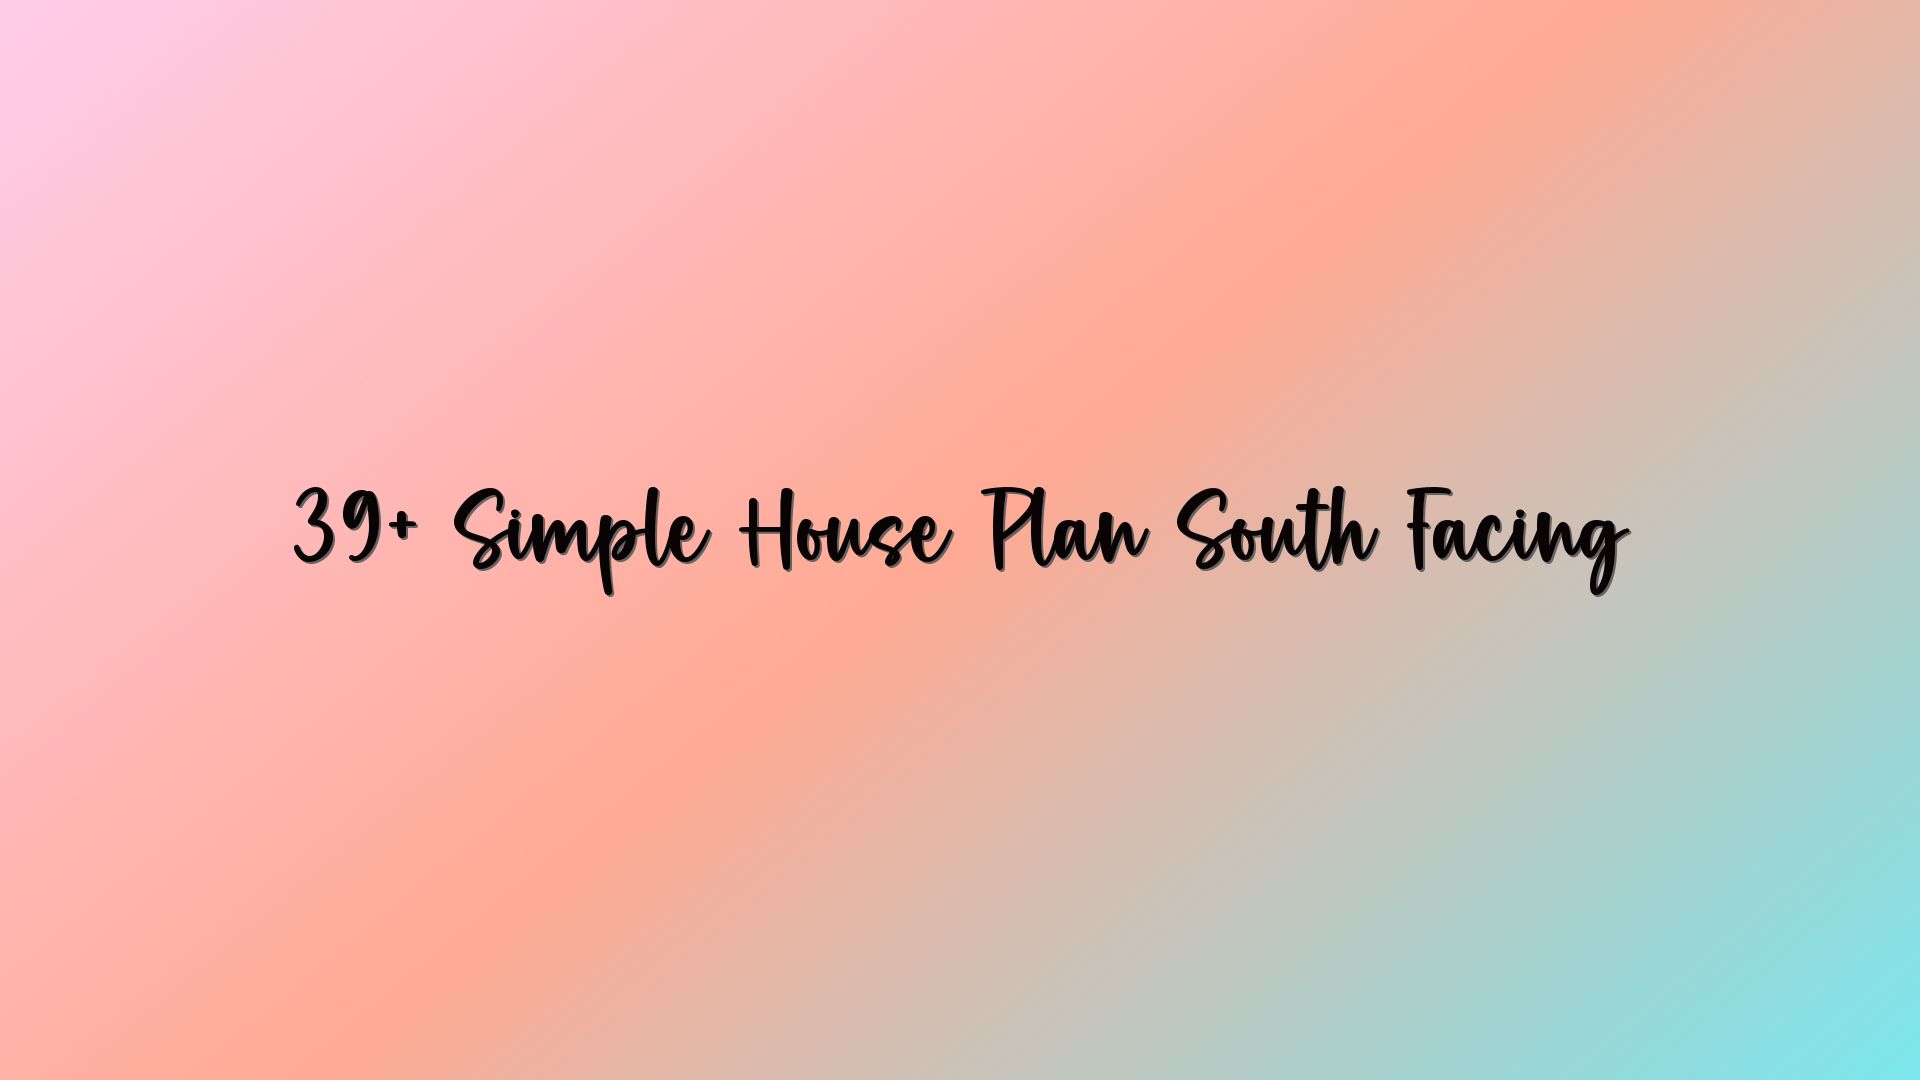 39+ Simple House Plan South Facing